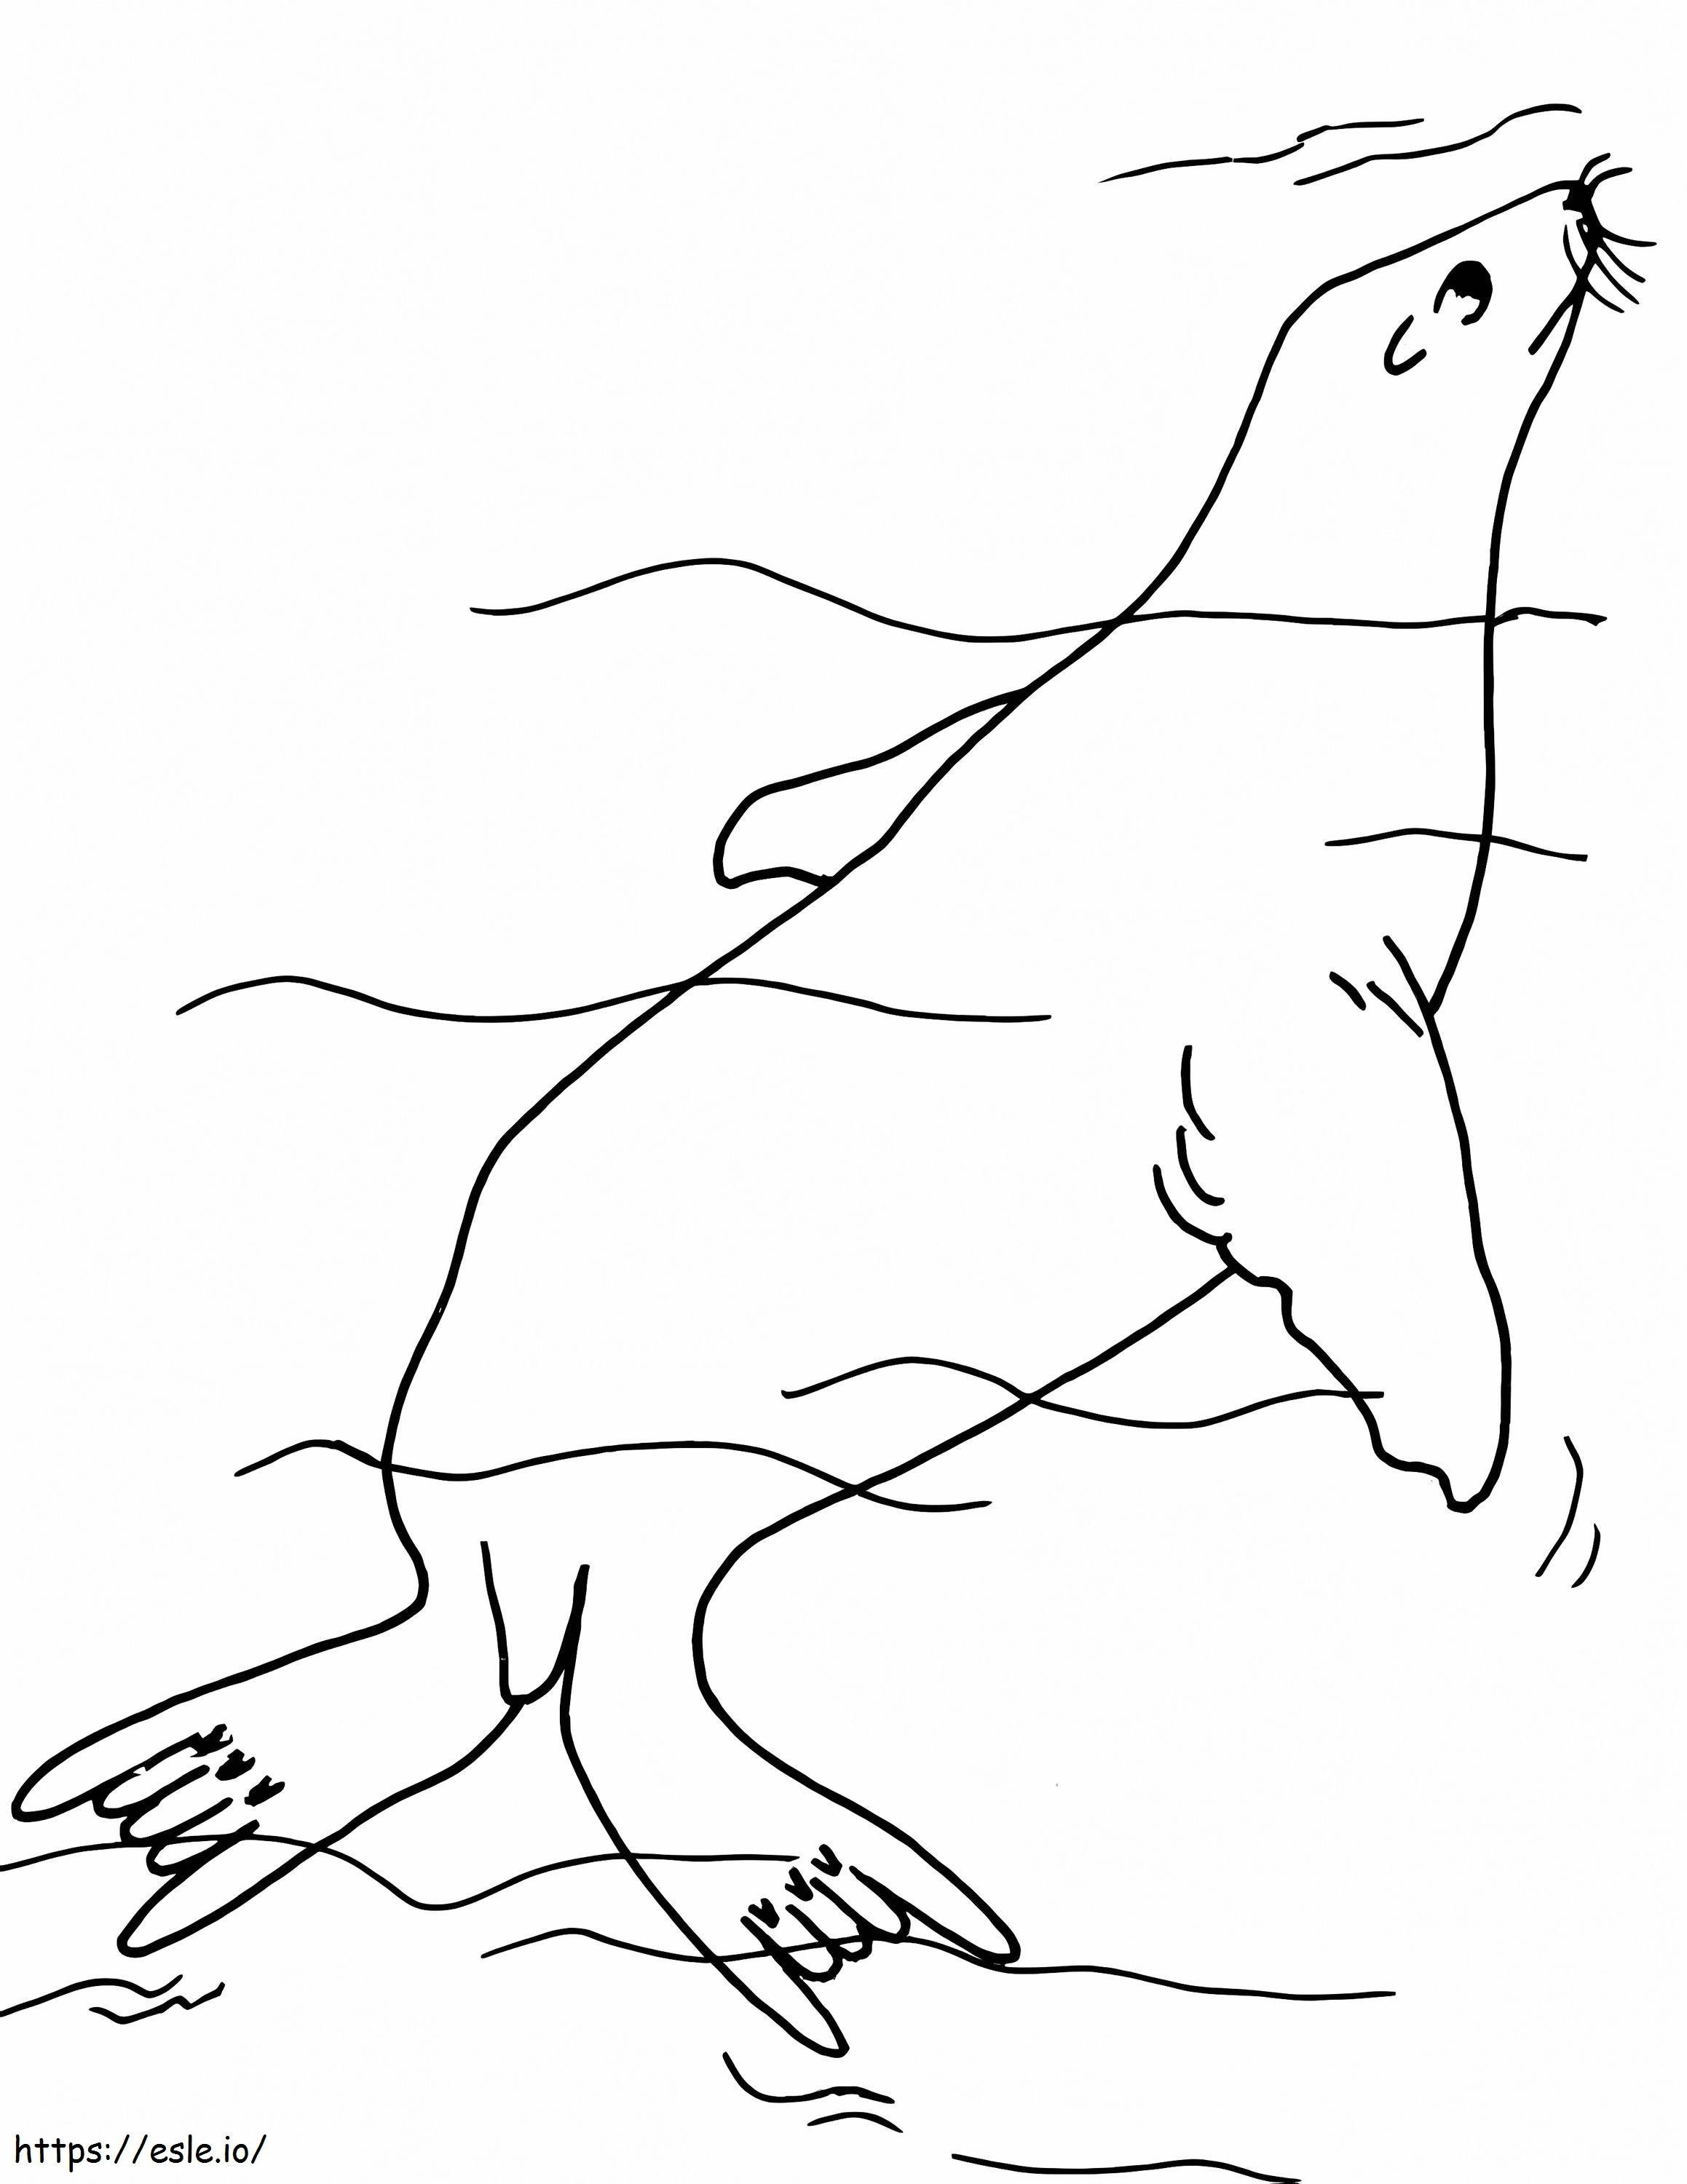 Seal Underwater coloring page